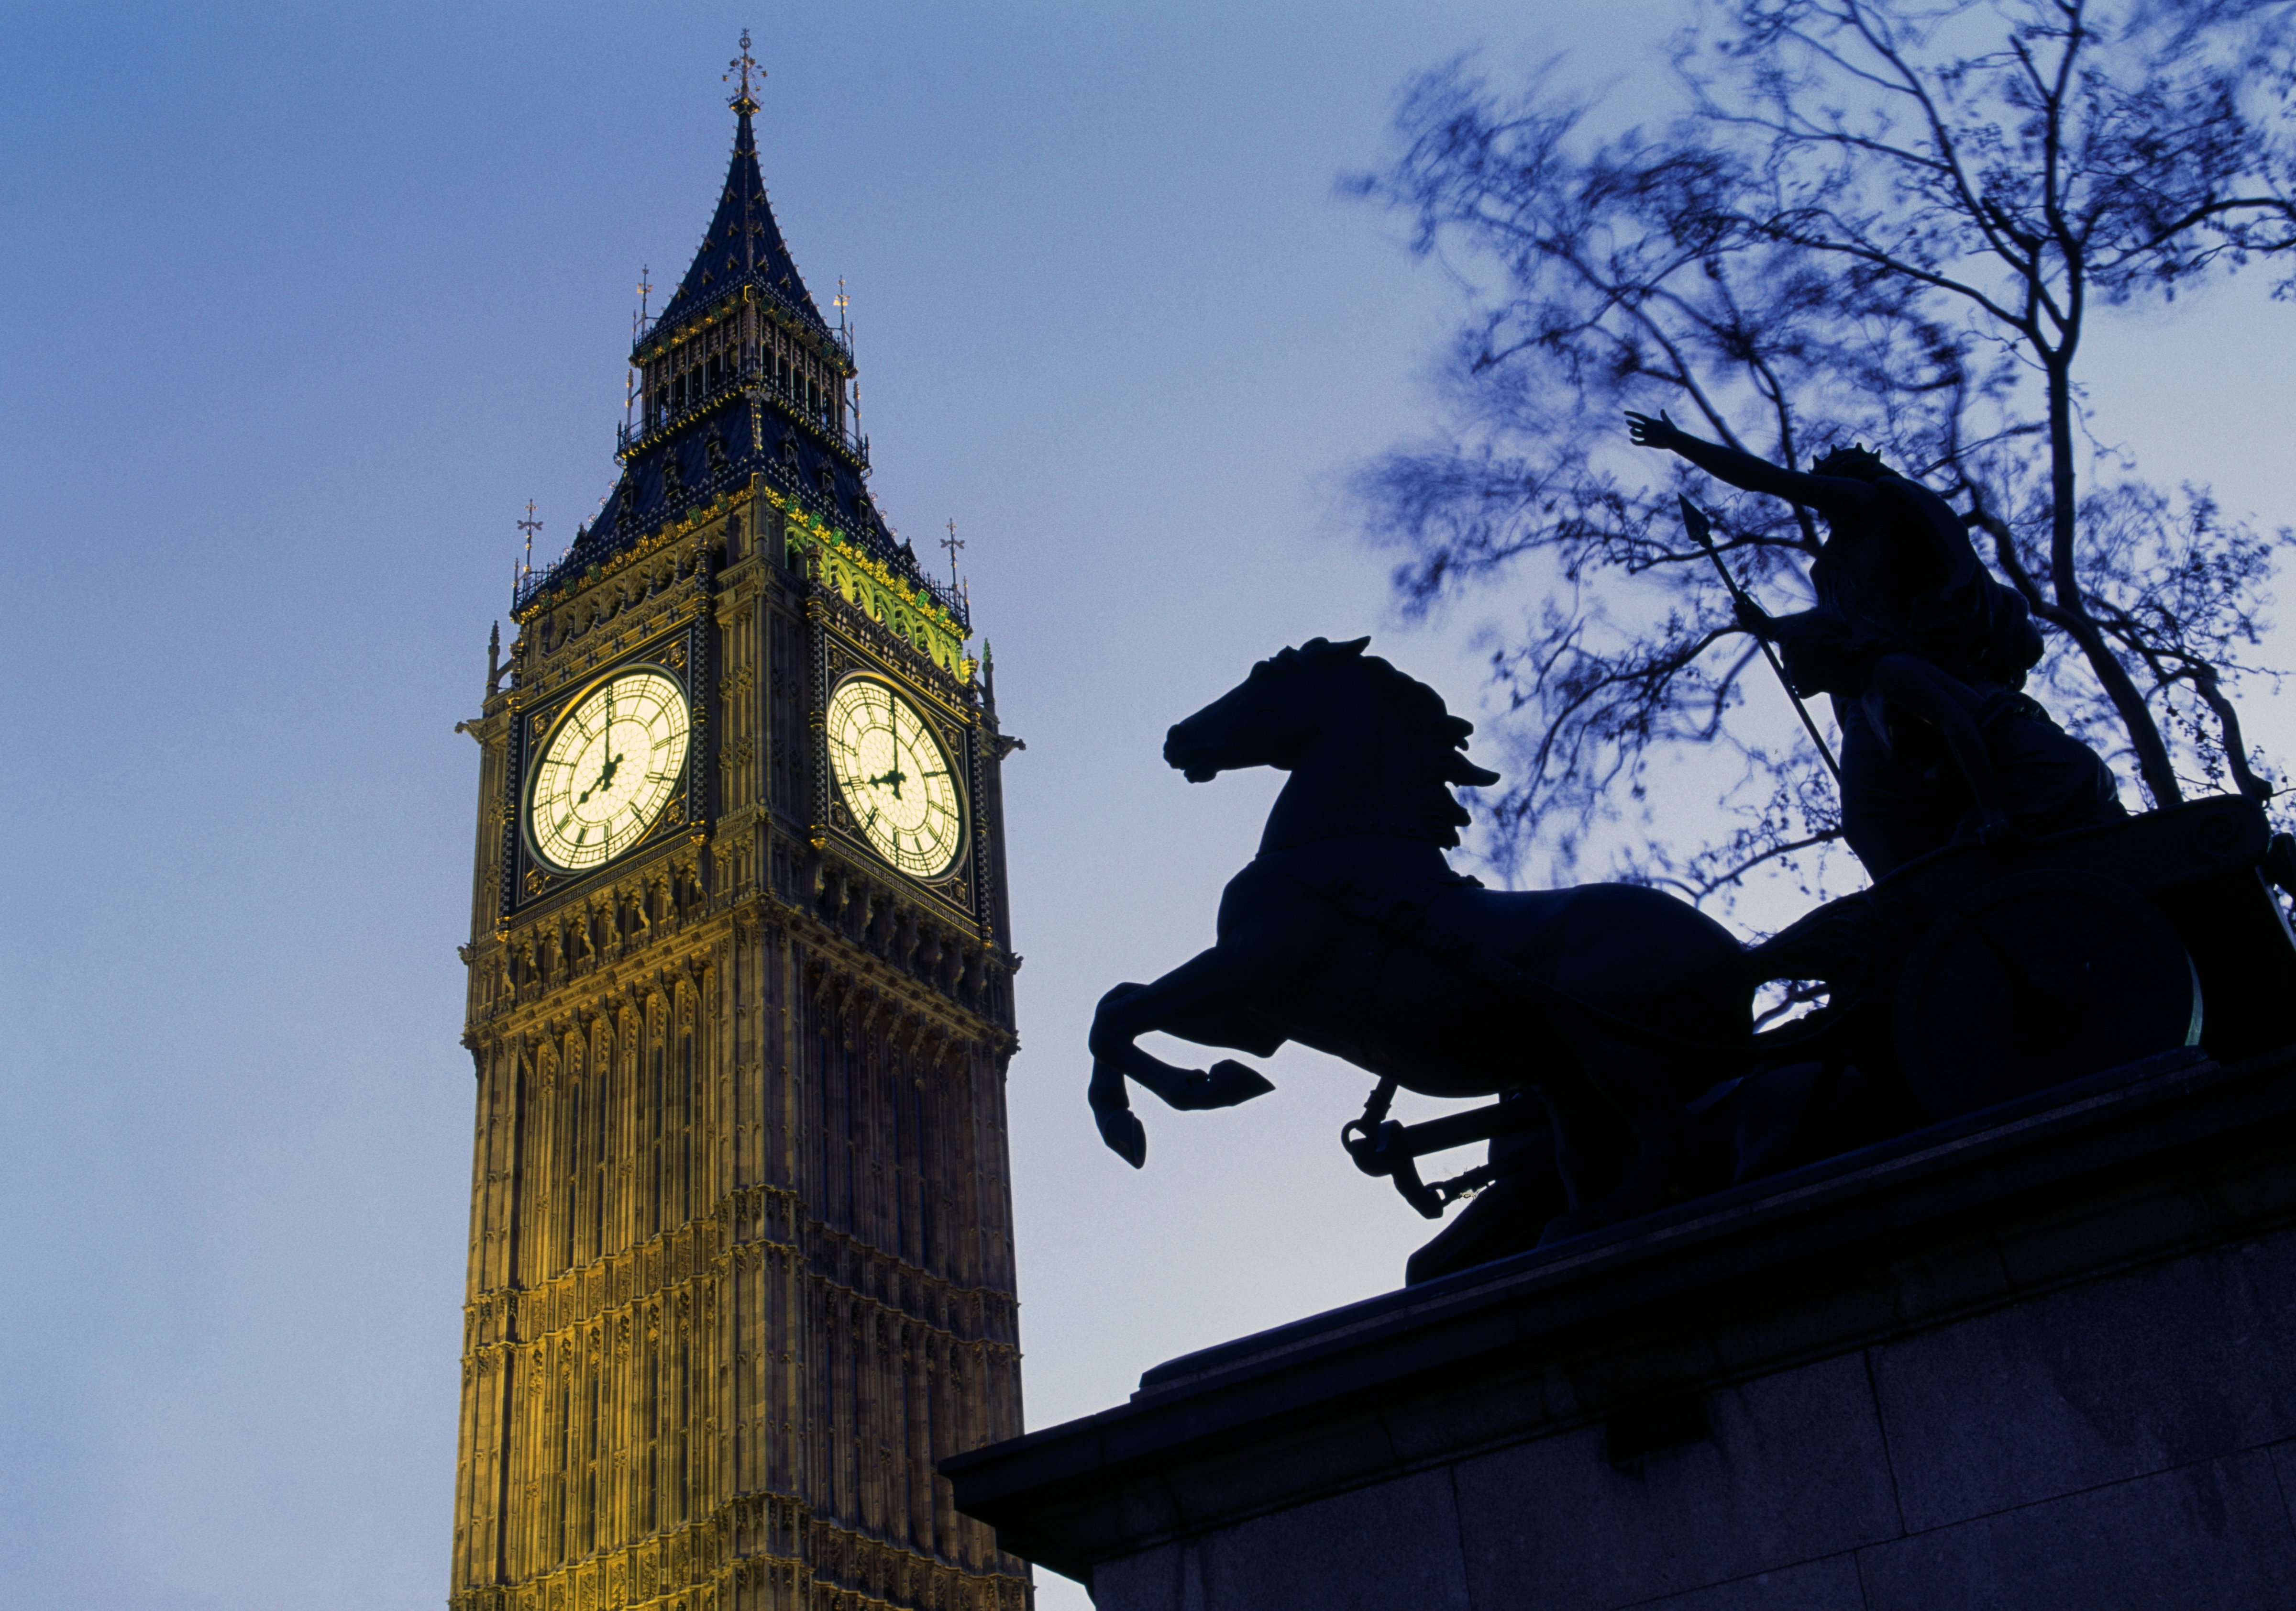 View of Big Ben in London, England (De Agostini/Getty Images)